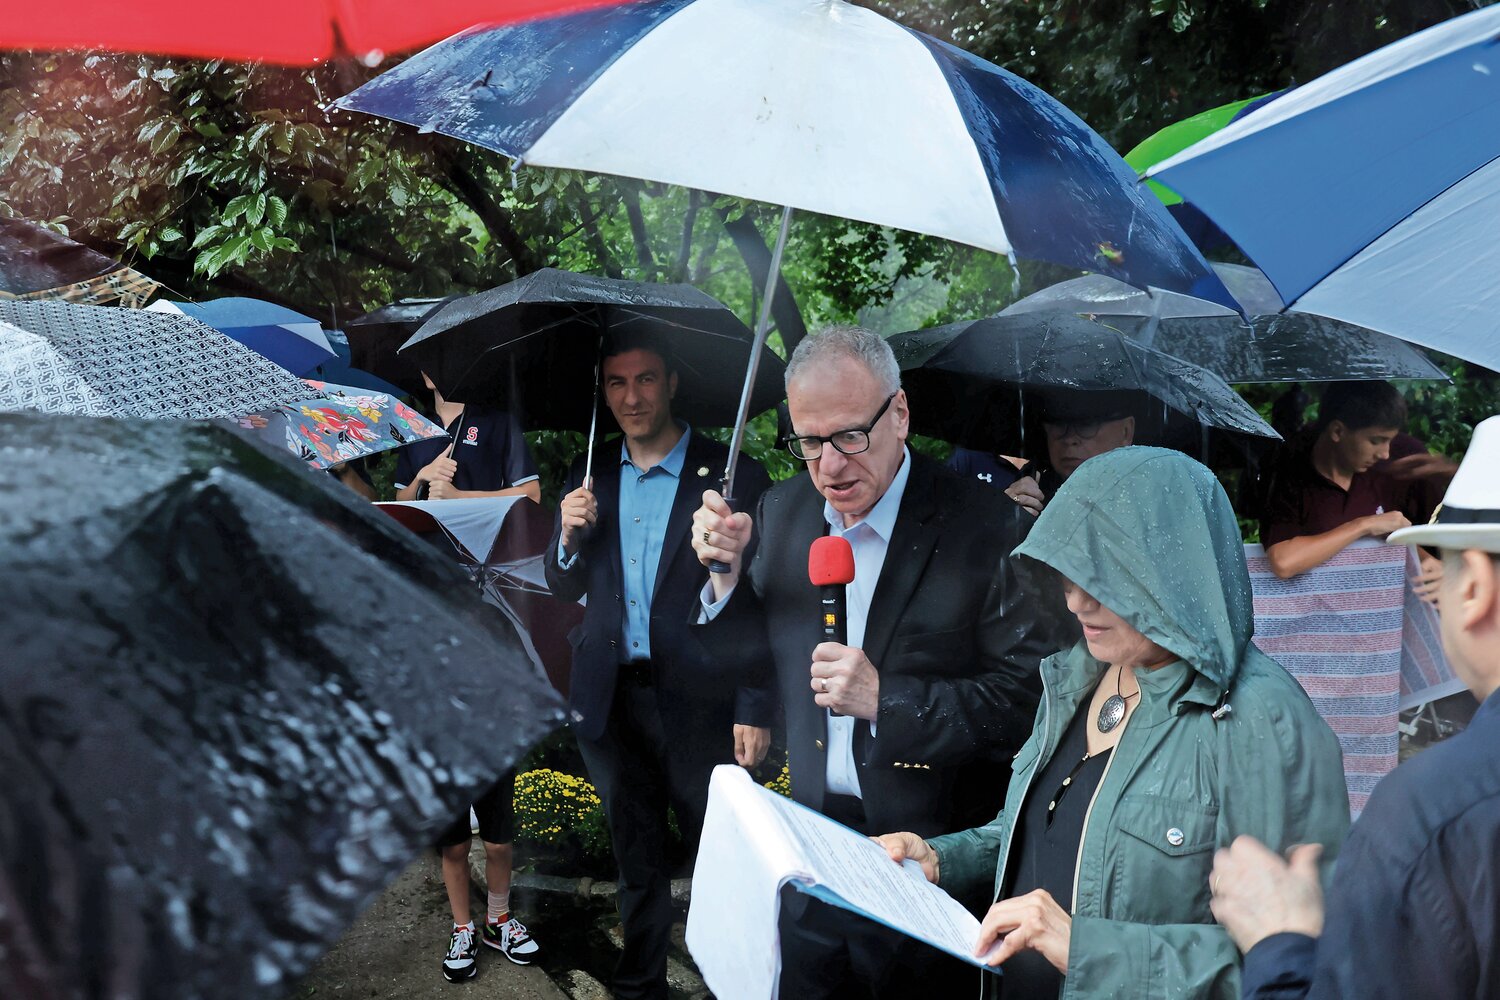 Some of the more than 30 people who showed up at Endor Community Garden to pay their respects to the victims of the Sept. 11, 2001 terrorist attacks braved the torrential rain. Among them were Assemblyman Jeffrey Dinowitz and Laura and Rob Spalter as well as Rev. Brian McCarthy of St. Margaret of Cortona.